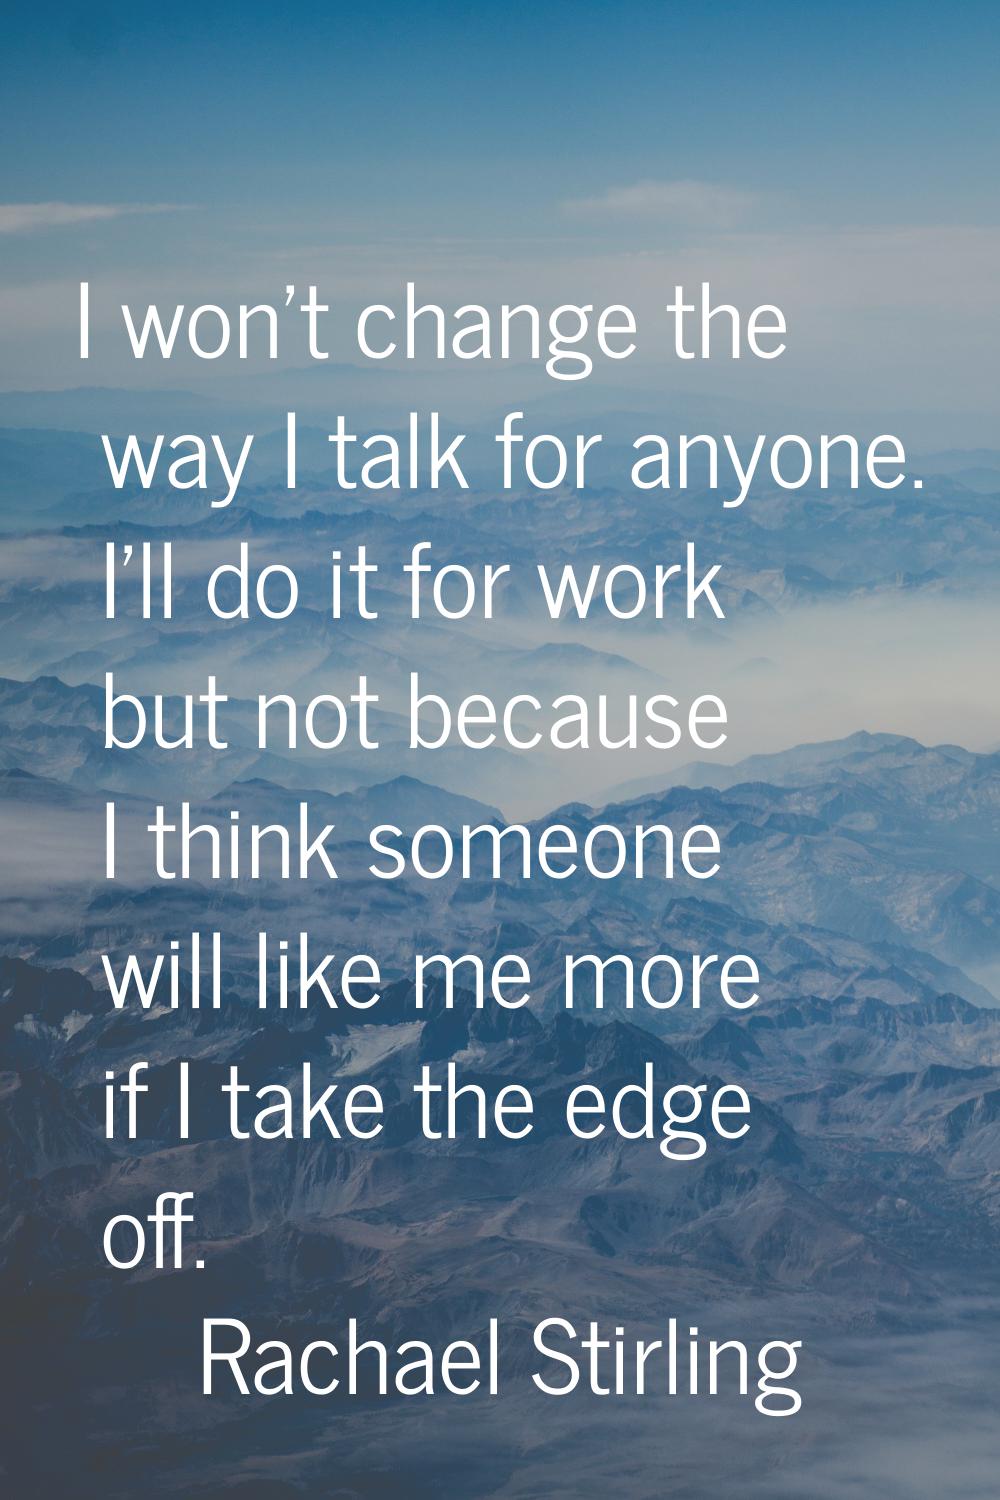 I won't change the way I talk for anyone. I'll do it for work but not because I think someone will 